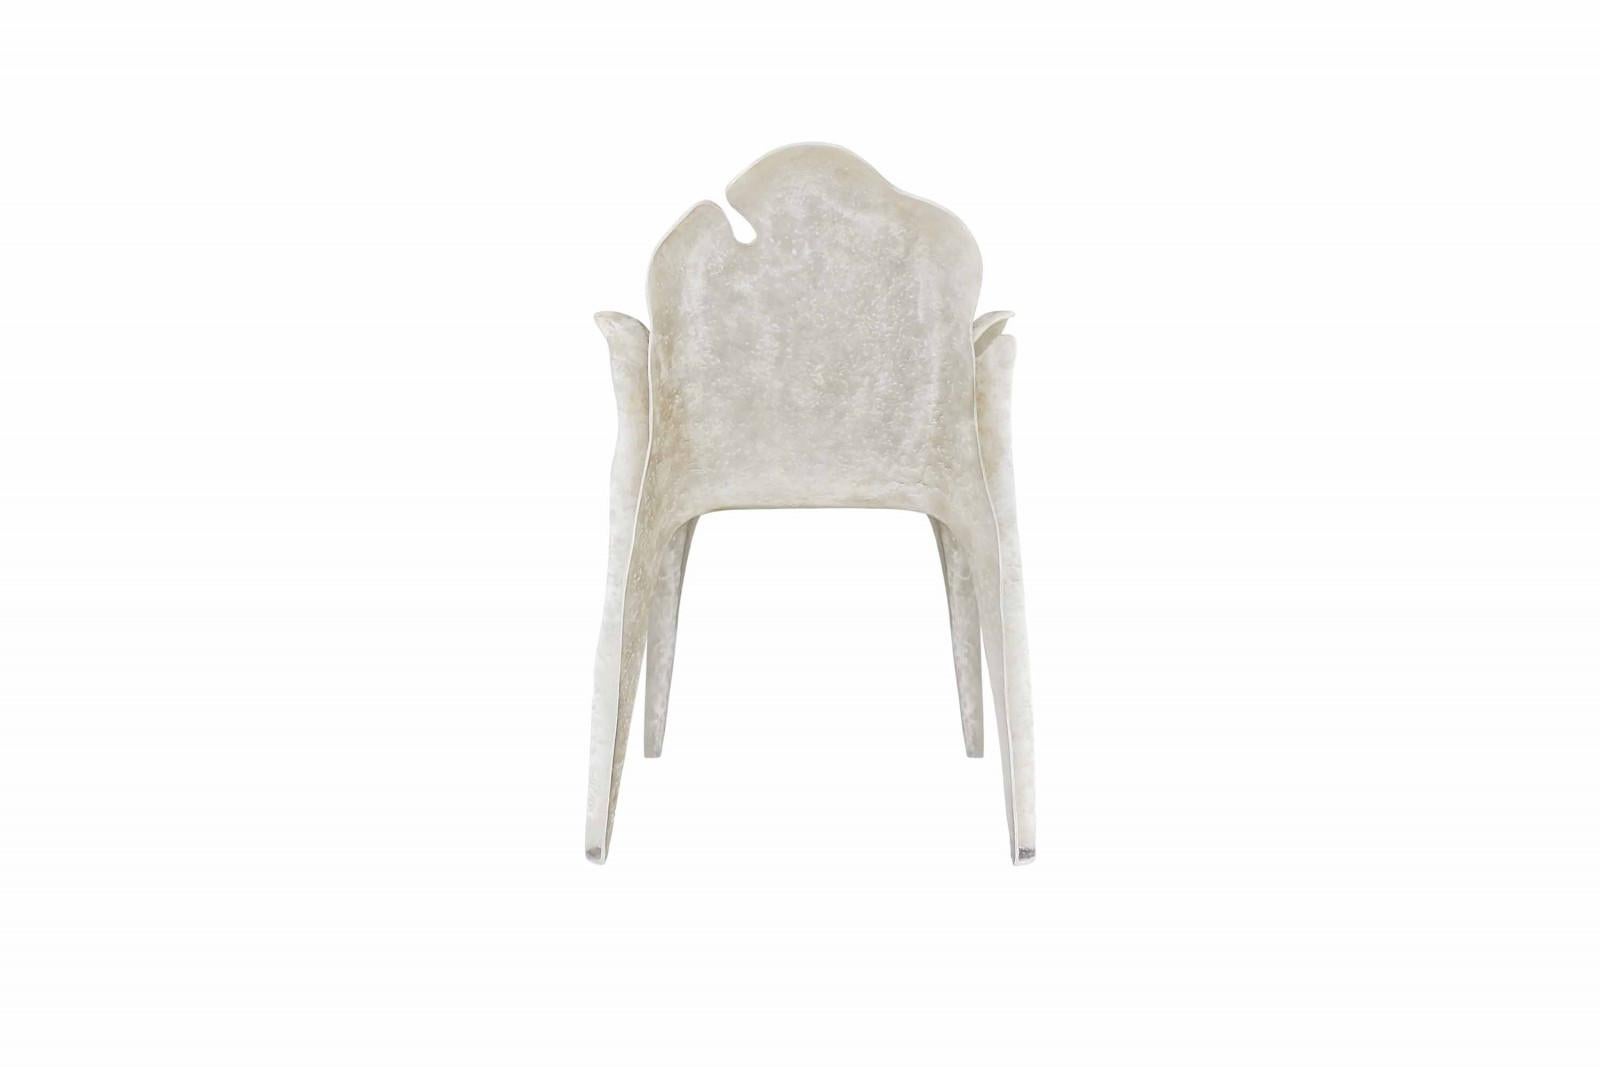 Portuguese Set of 8 Organic Shaped Dining Chairs in Metallic or Natural Finish For Sale